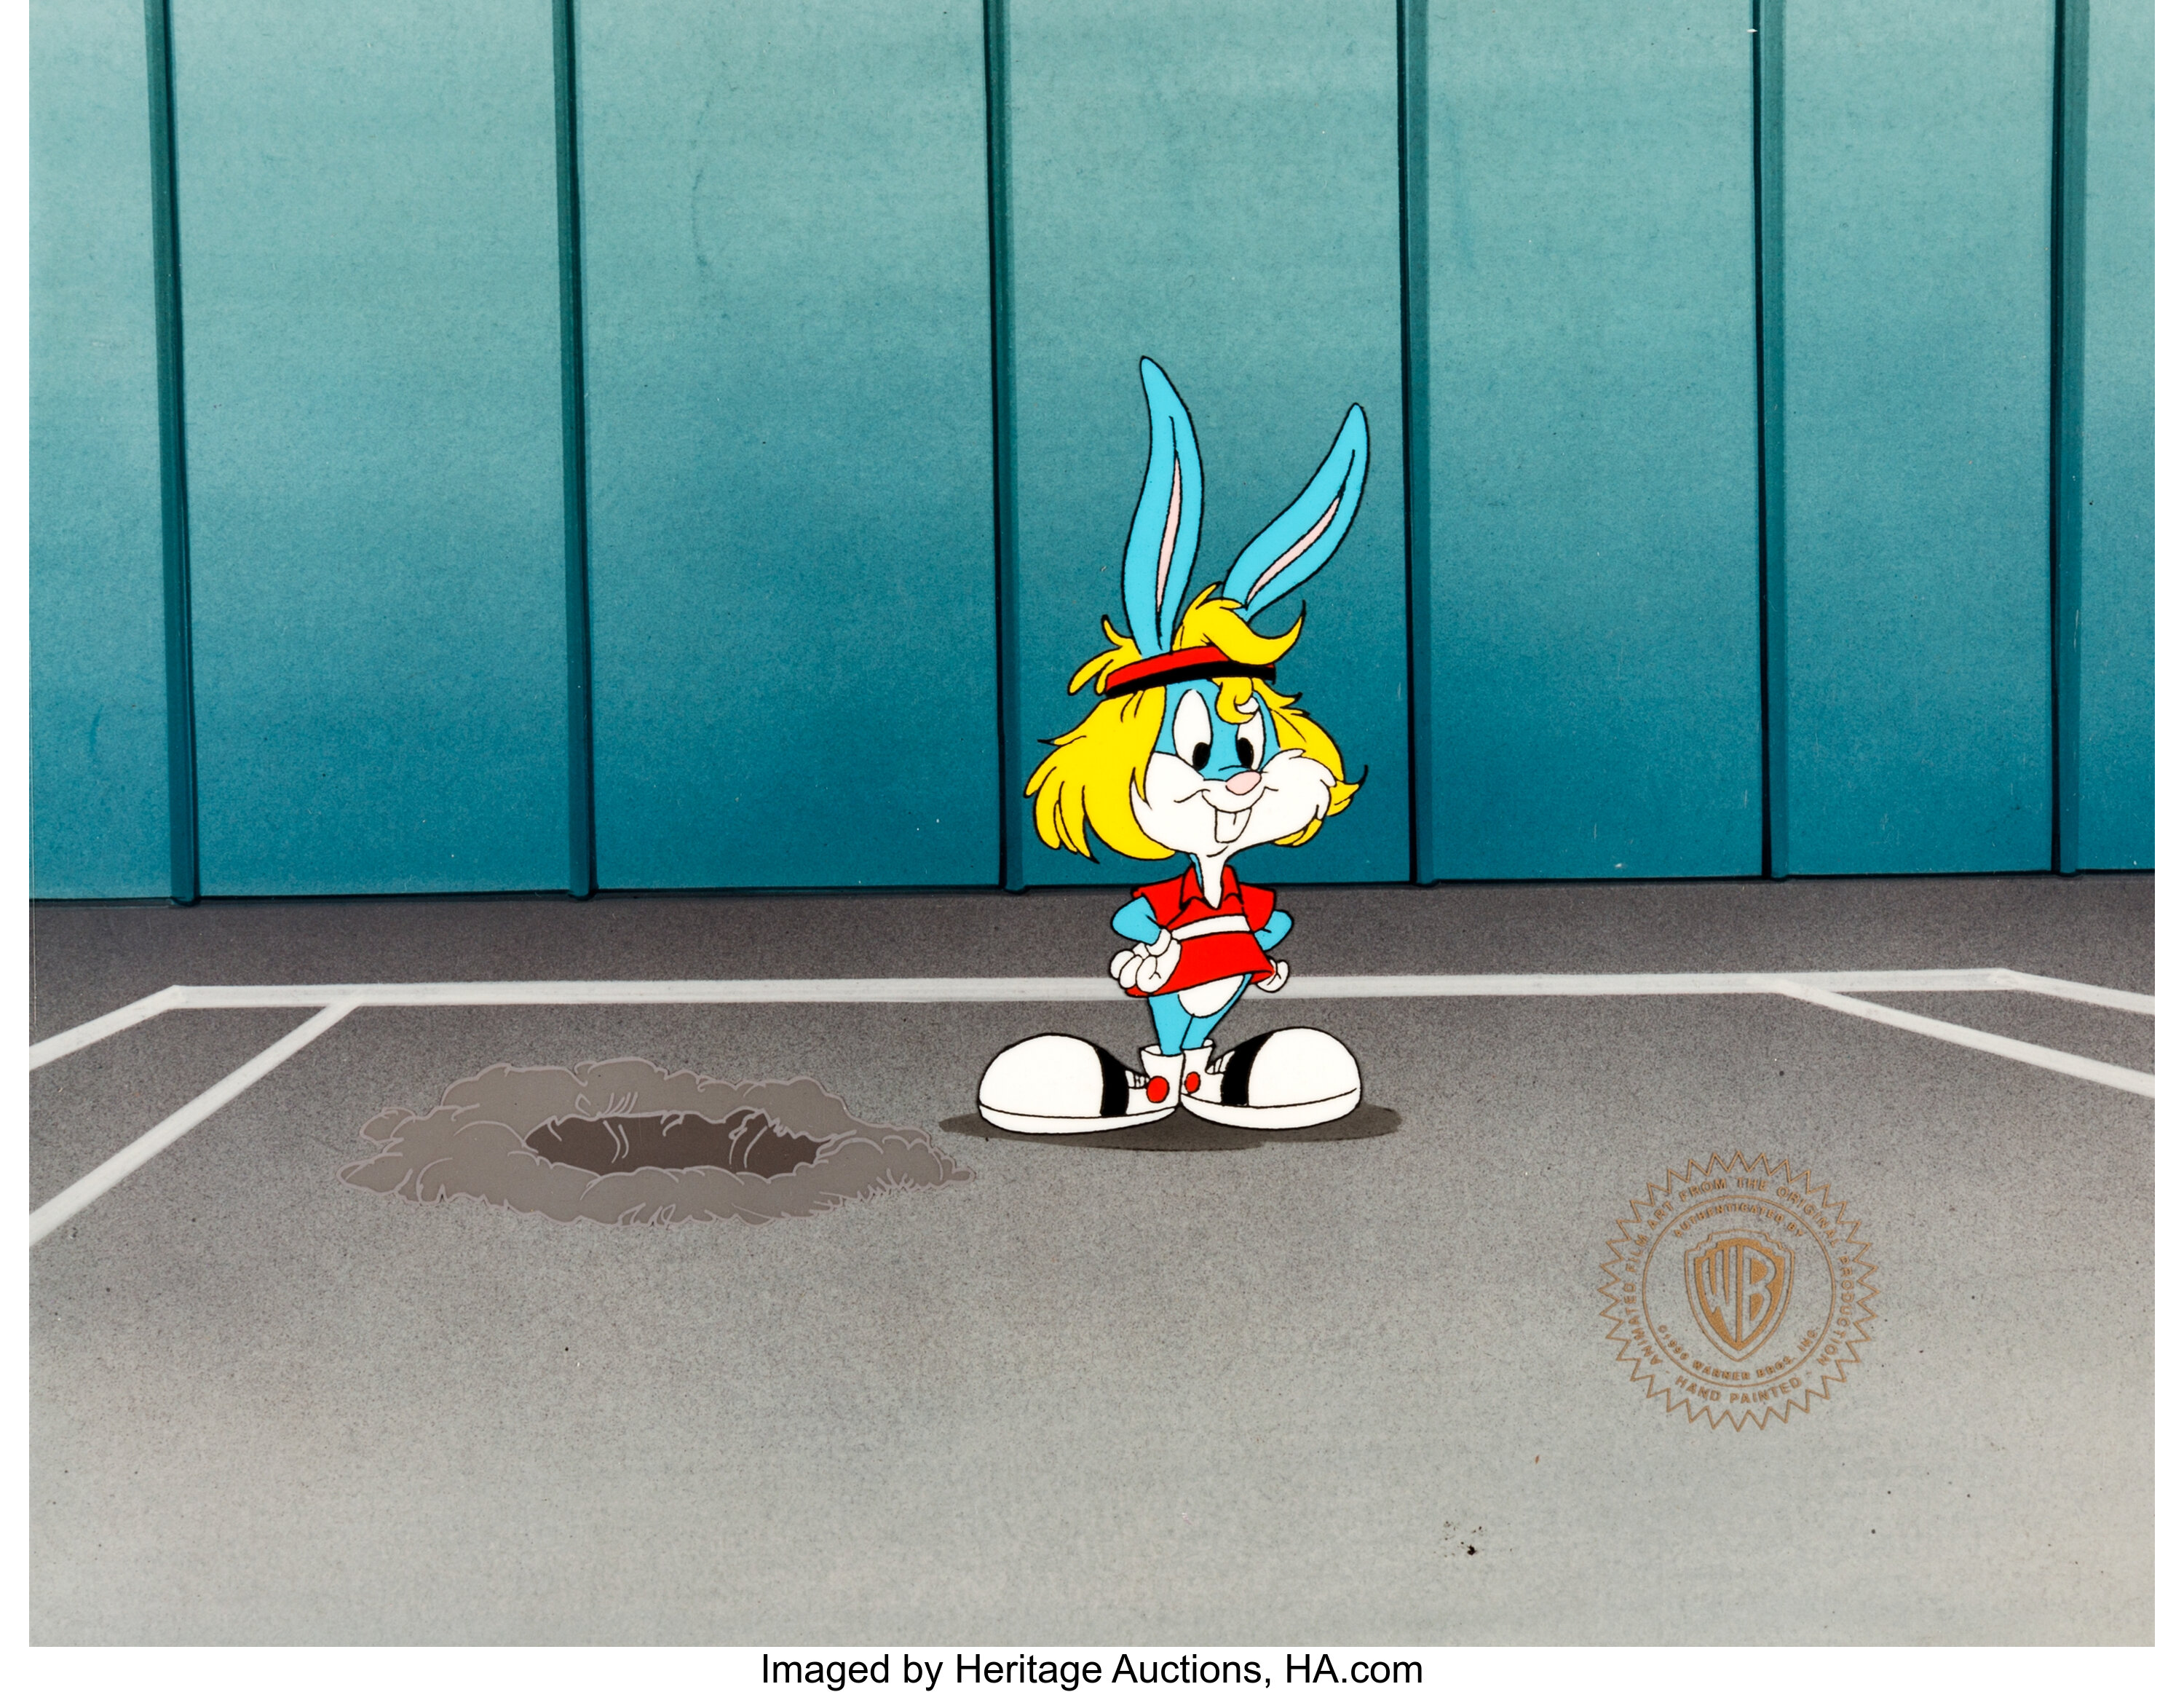 Tiny Toons Adventures-Original Production Cel-Buster/Bugs Bunny-Life In The  90s